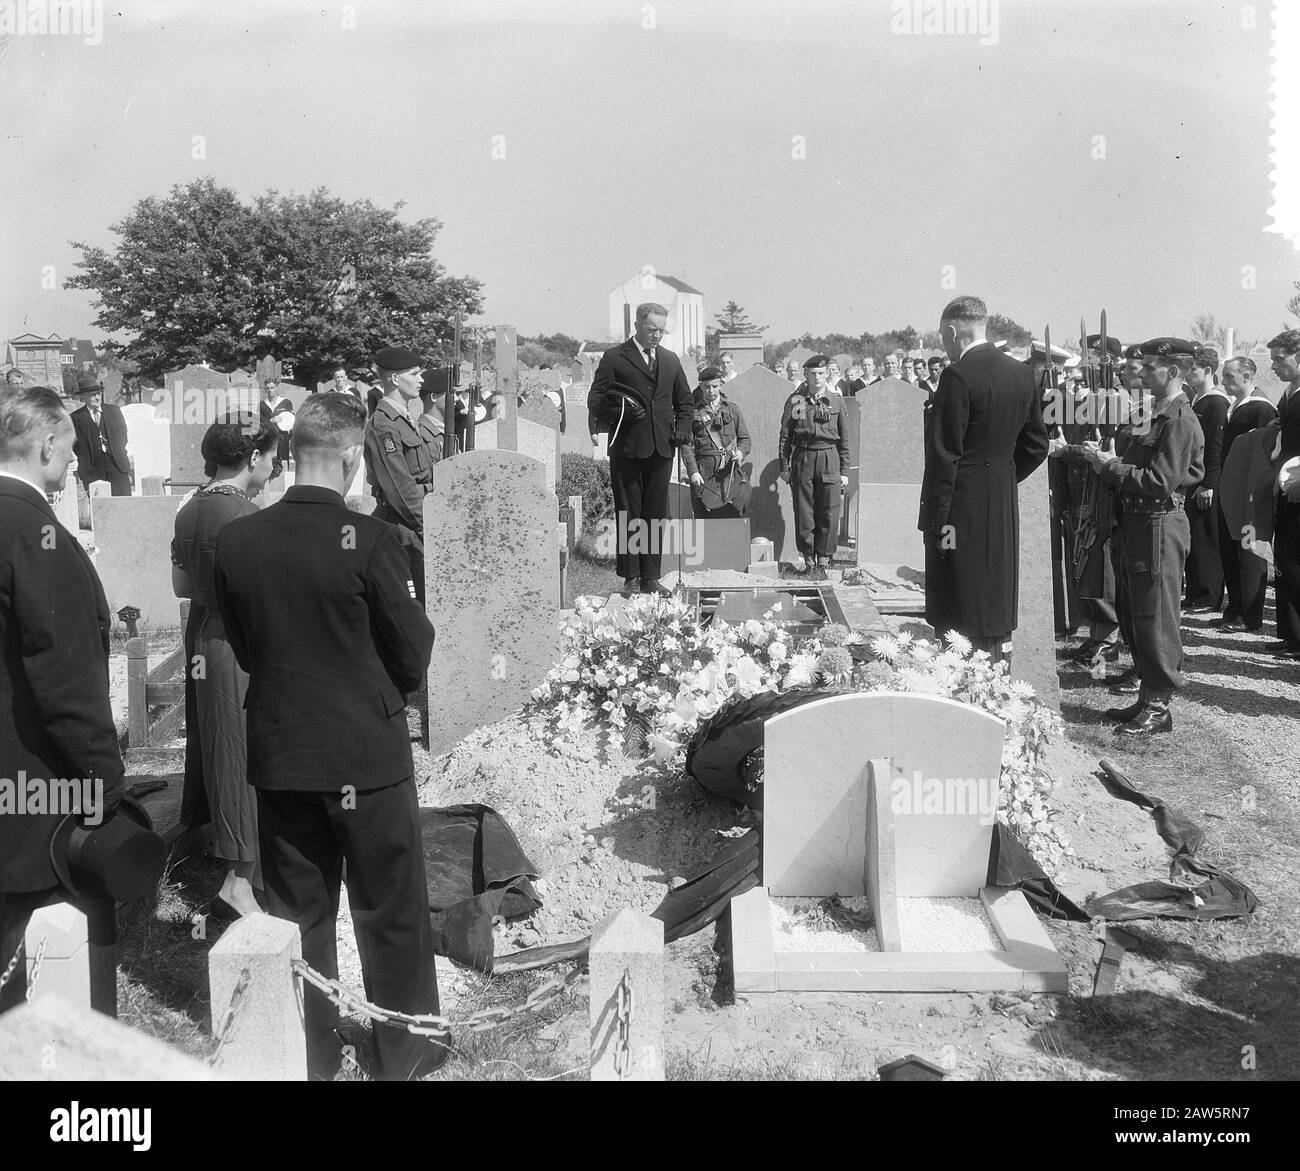 Military funeral seaman 1st class Z. W. Barends Daman Date: July 13, 1955 Location: Den Helder Keywords: funeral Person Name: Barends, W.Z. Stock Photo